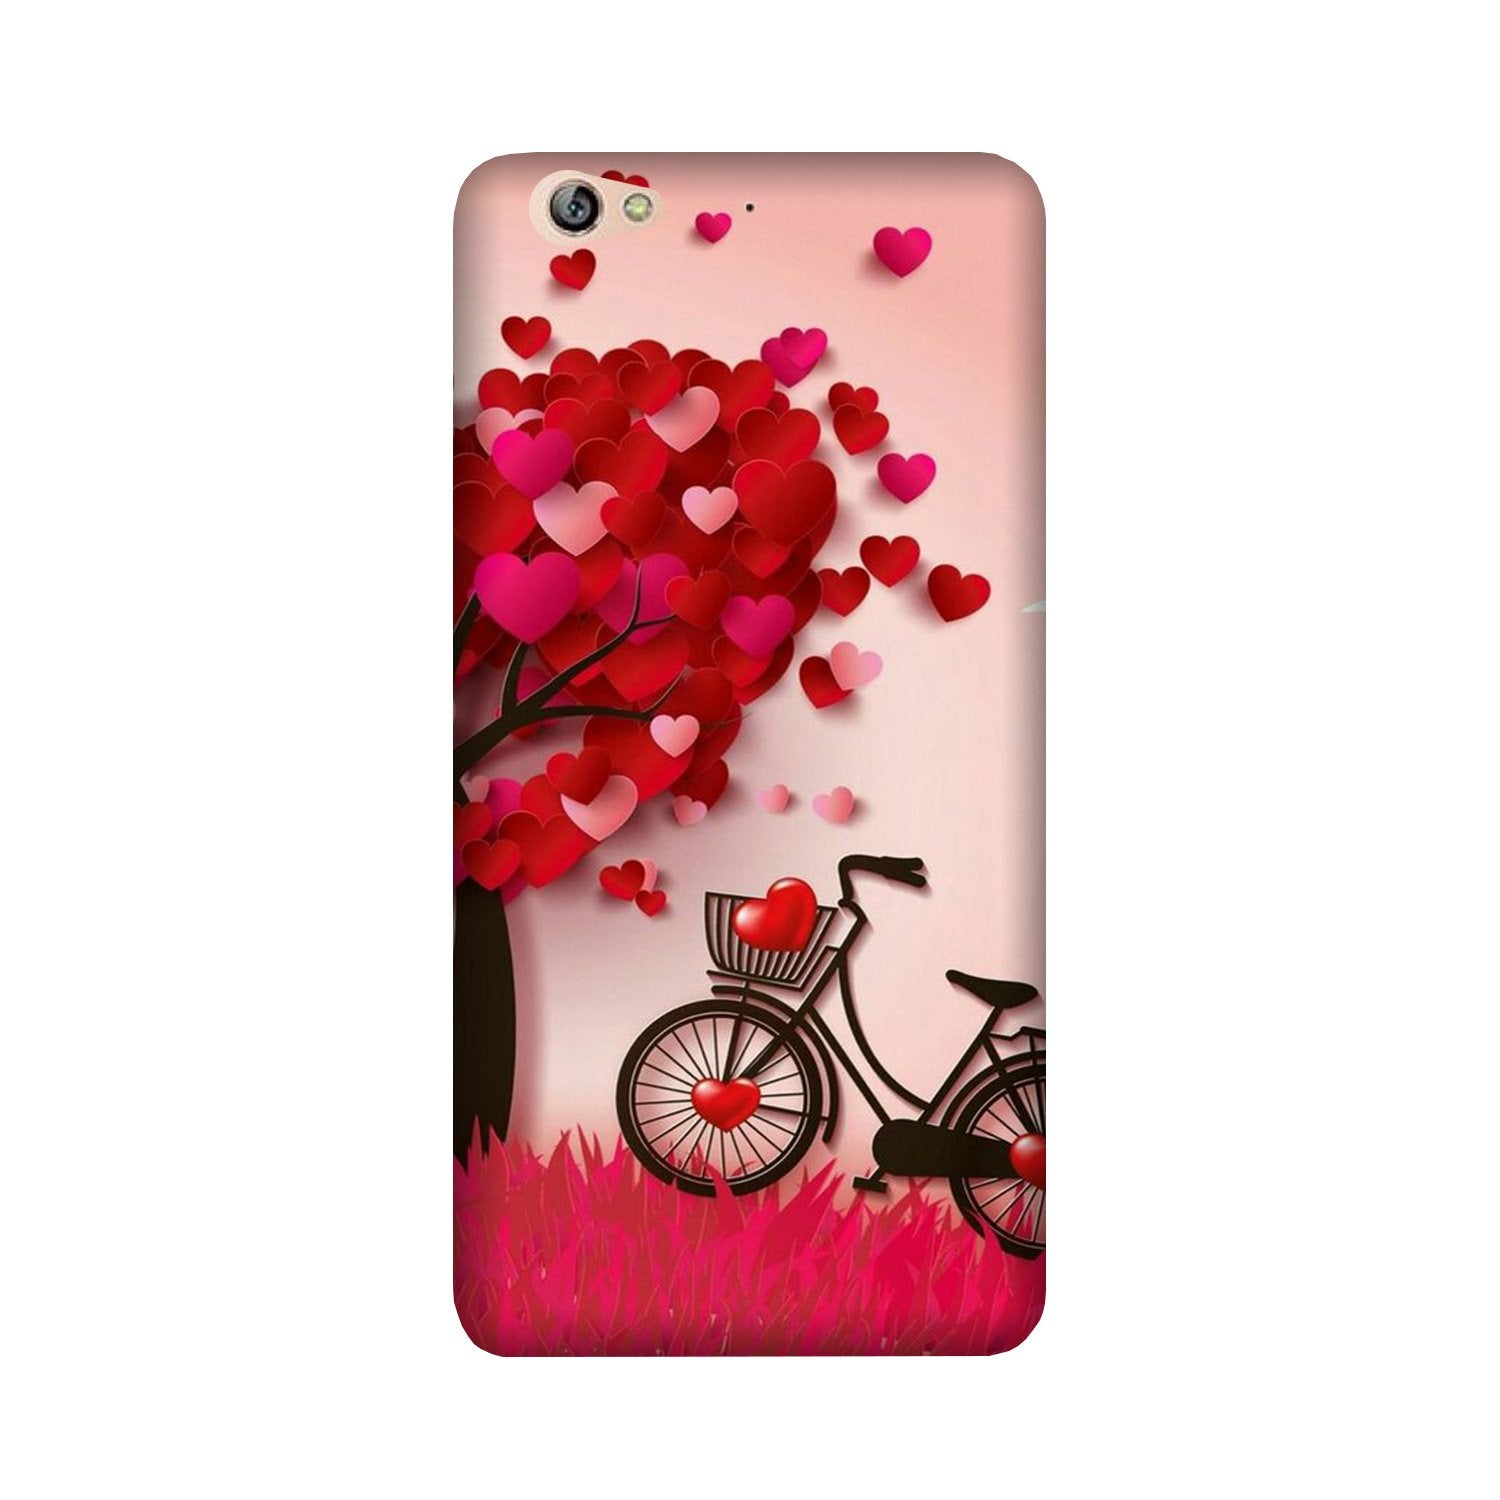 Red Heart Cycle Case for Gionee S6 (Design No. 222)